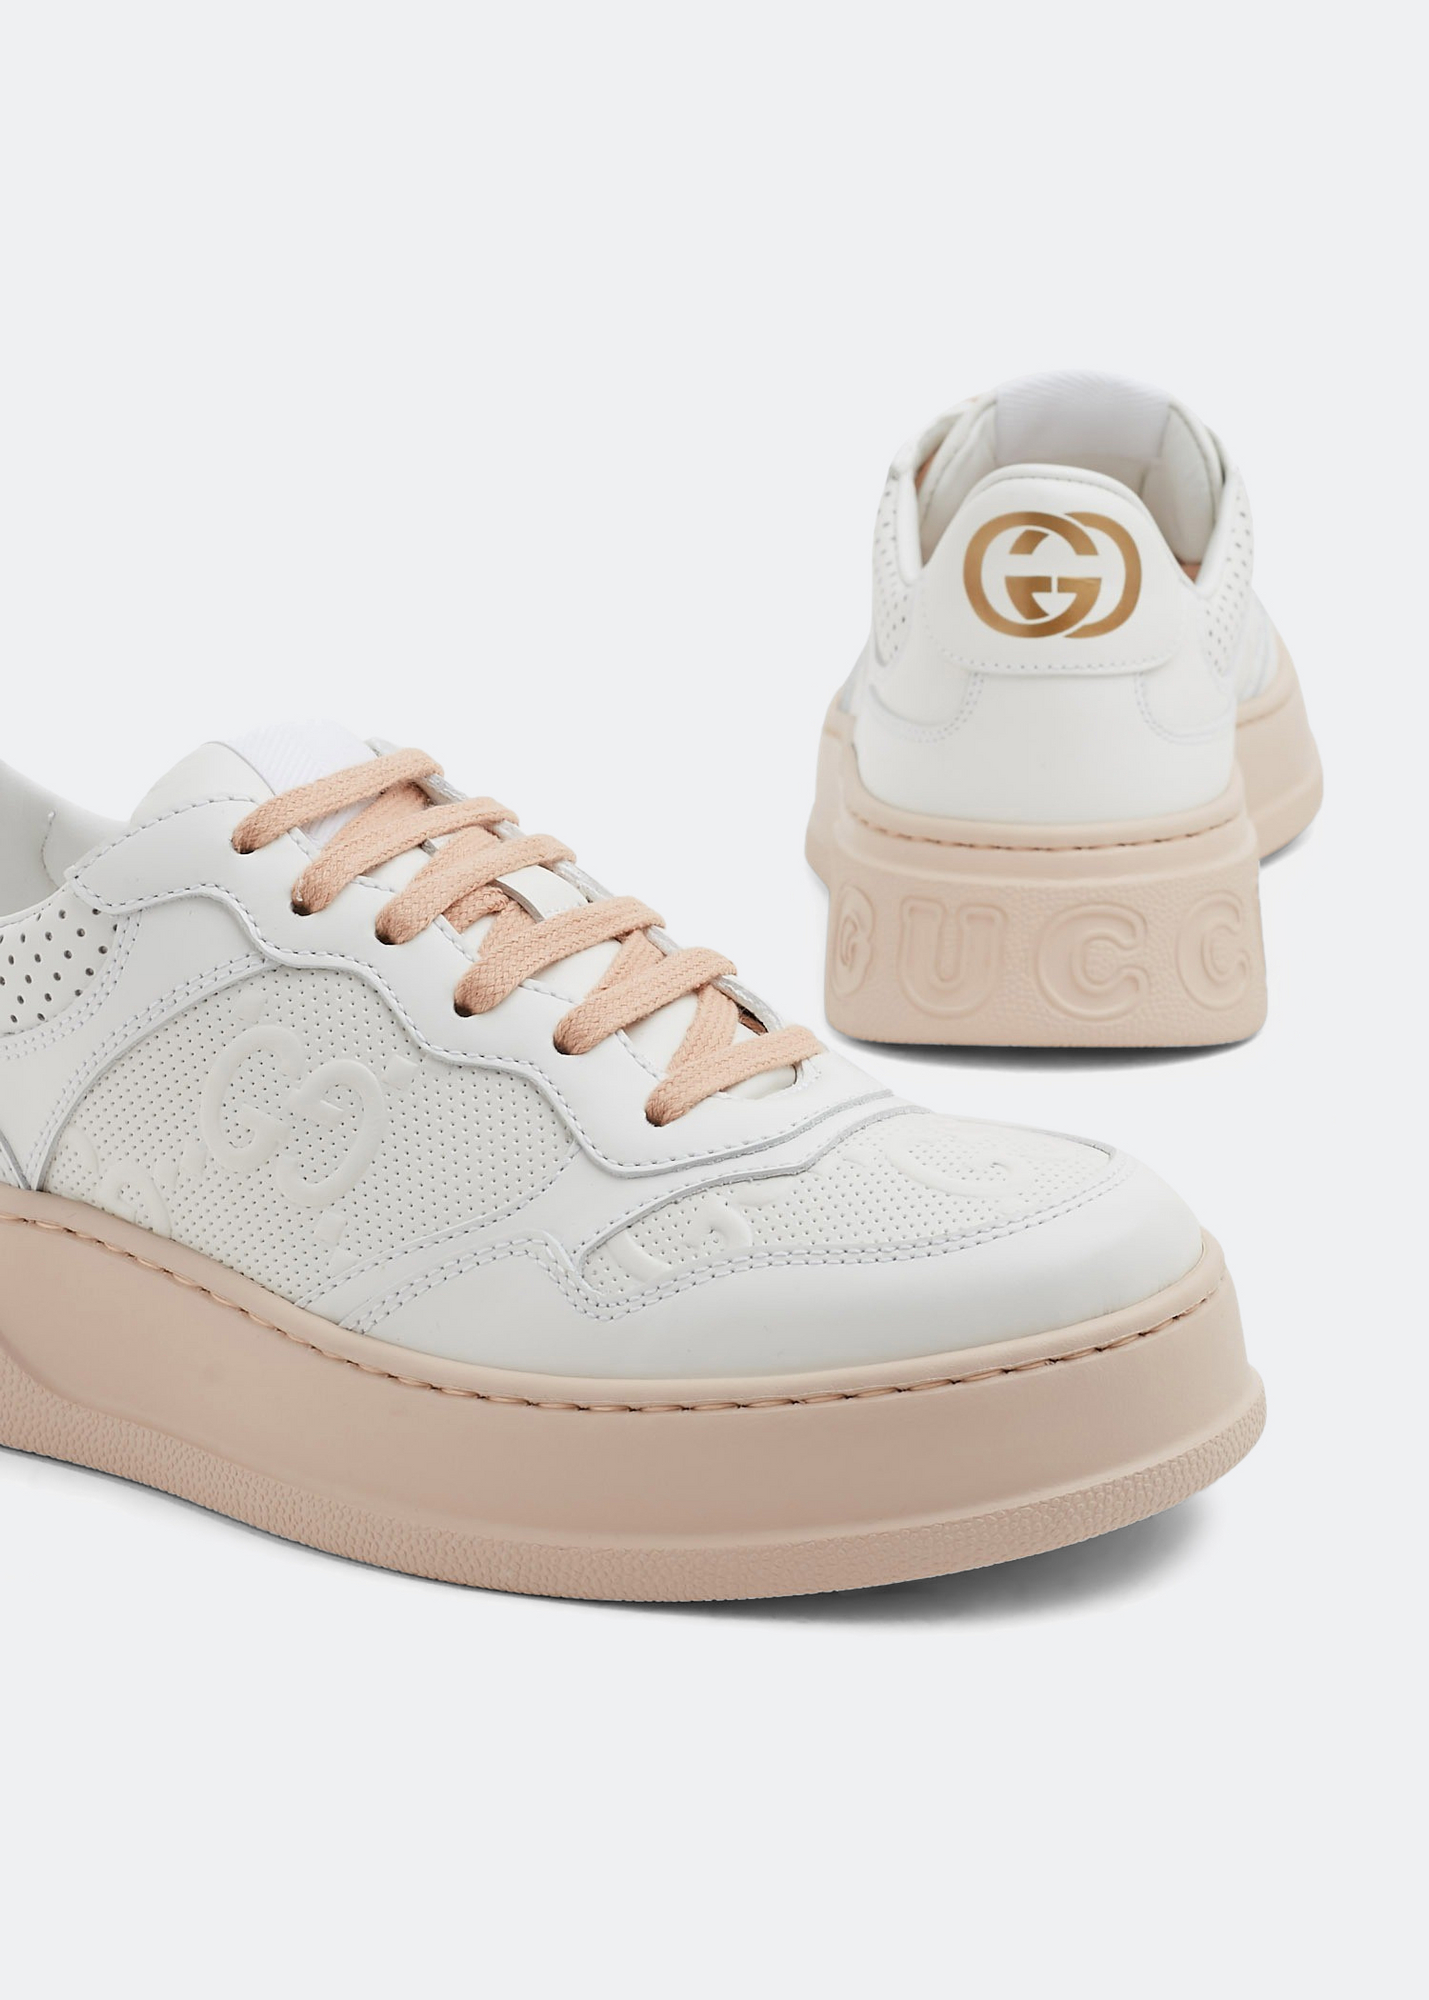 Gucci GG embossed sneakers for Women - White in KSA | Level Shoes